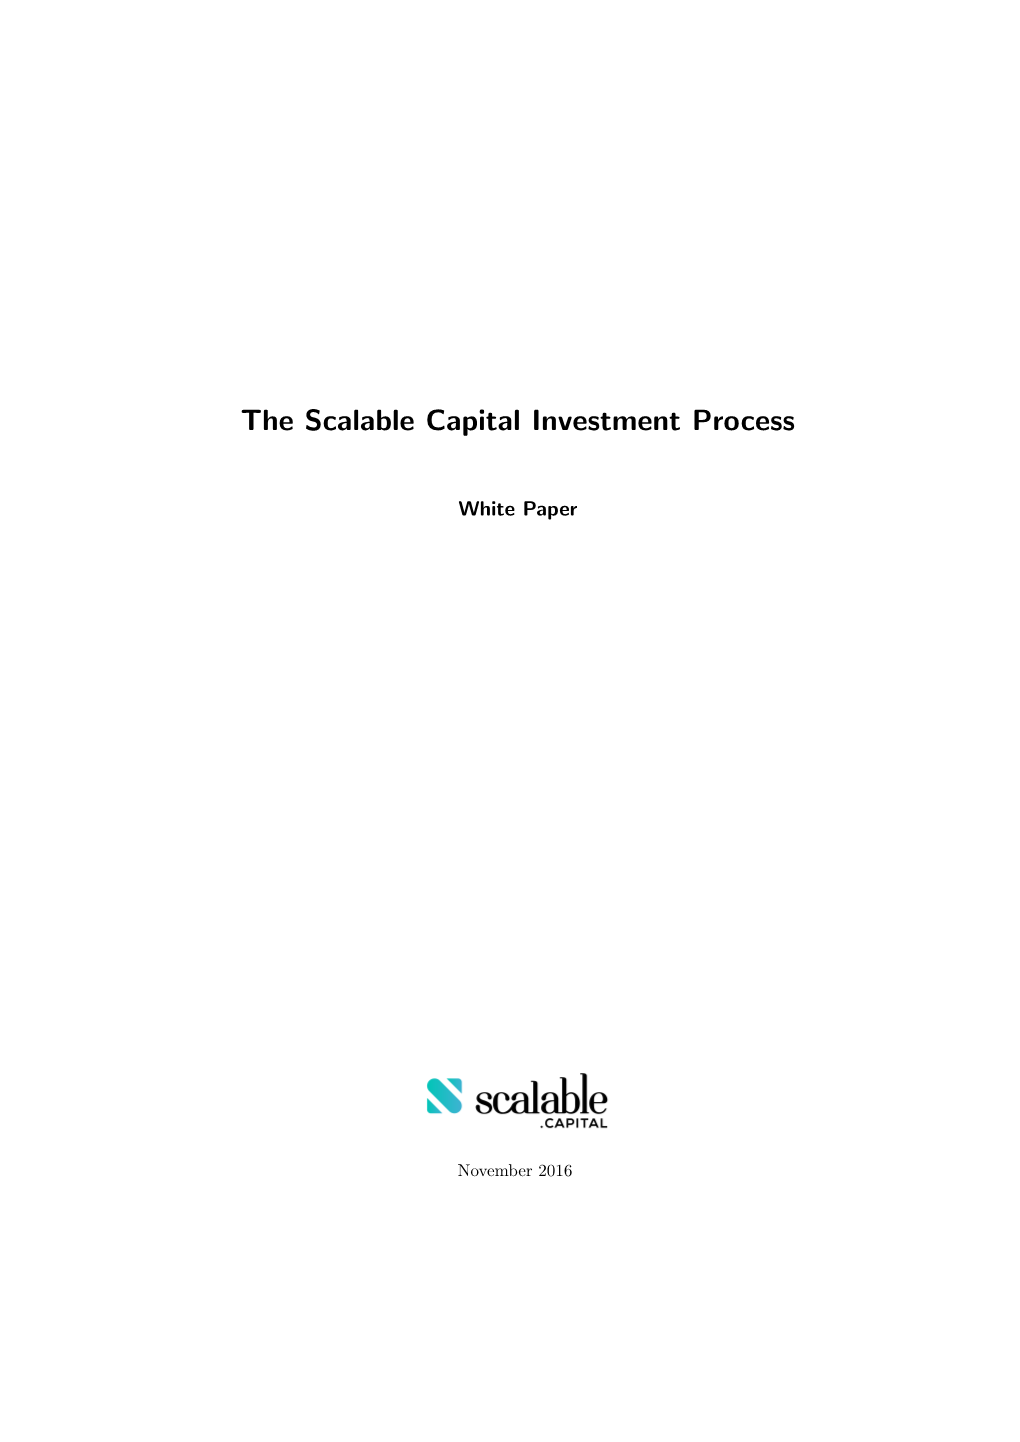 The Scalable Capital Investment Process